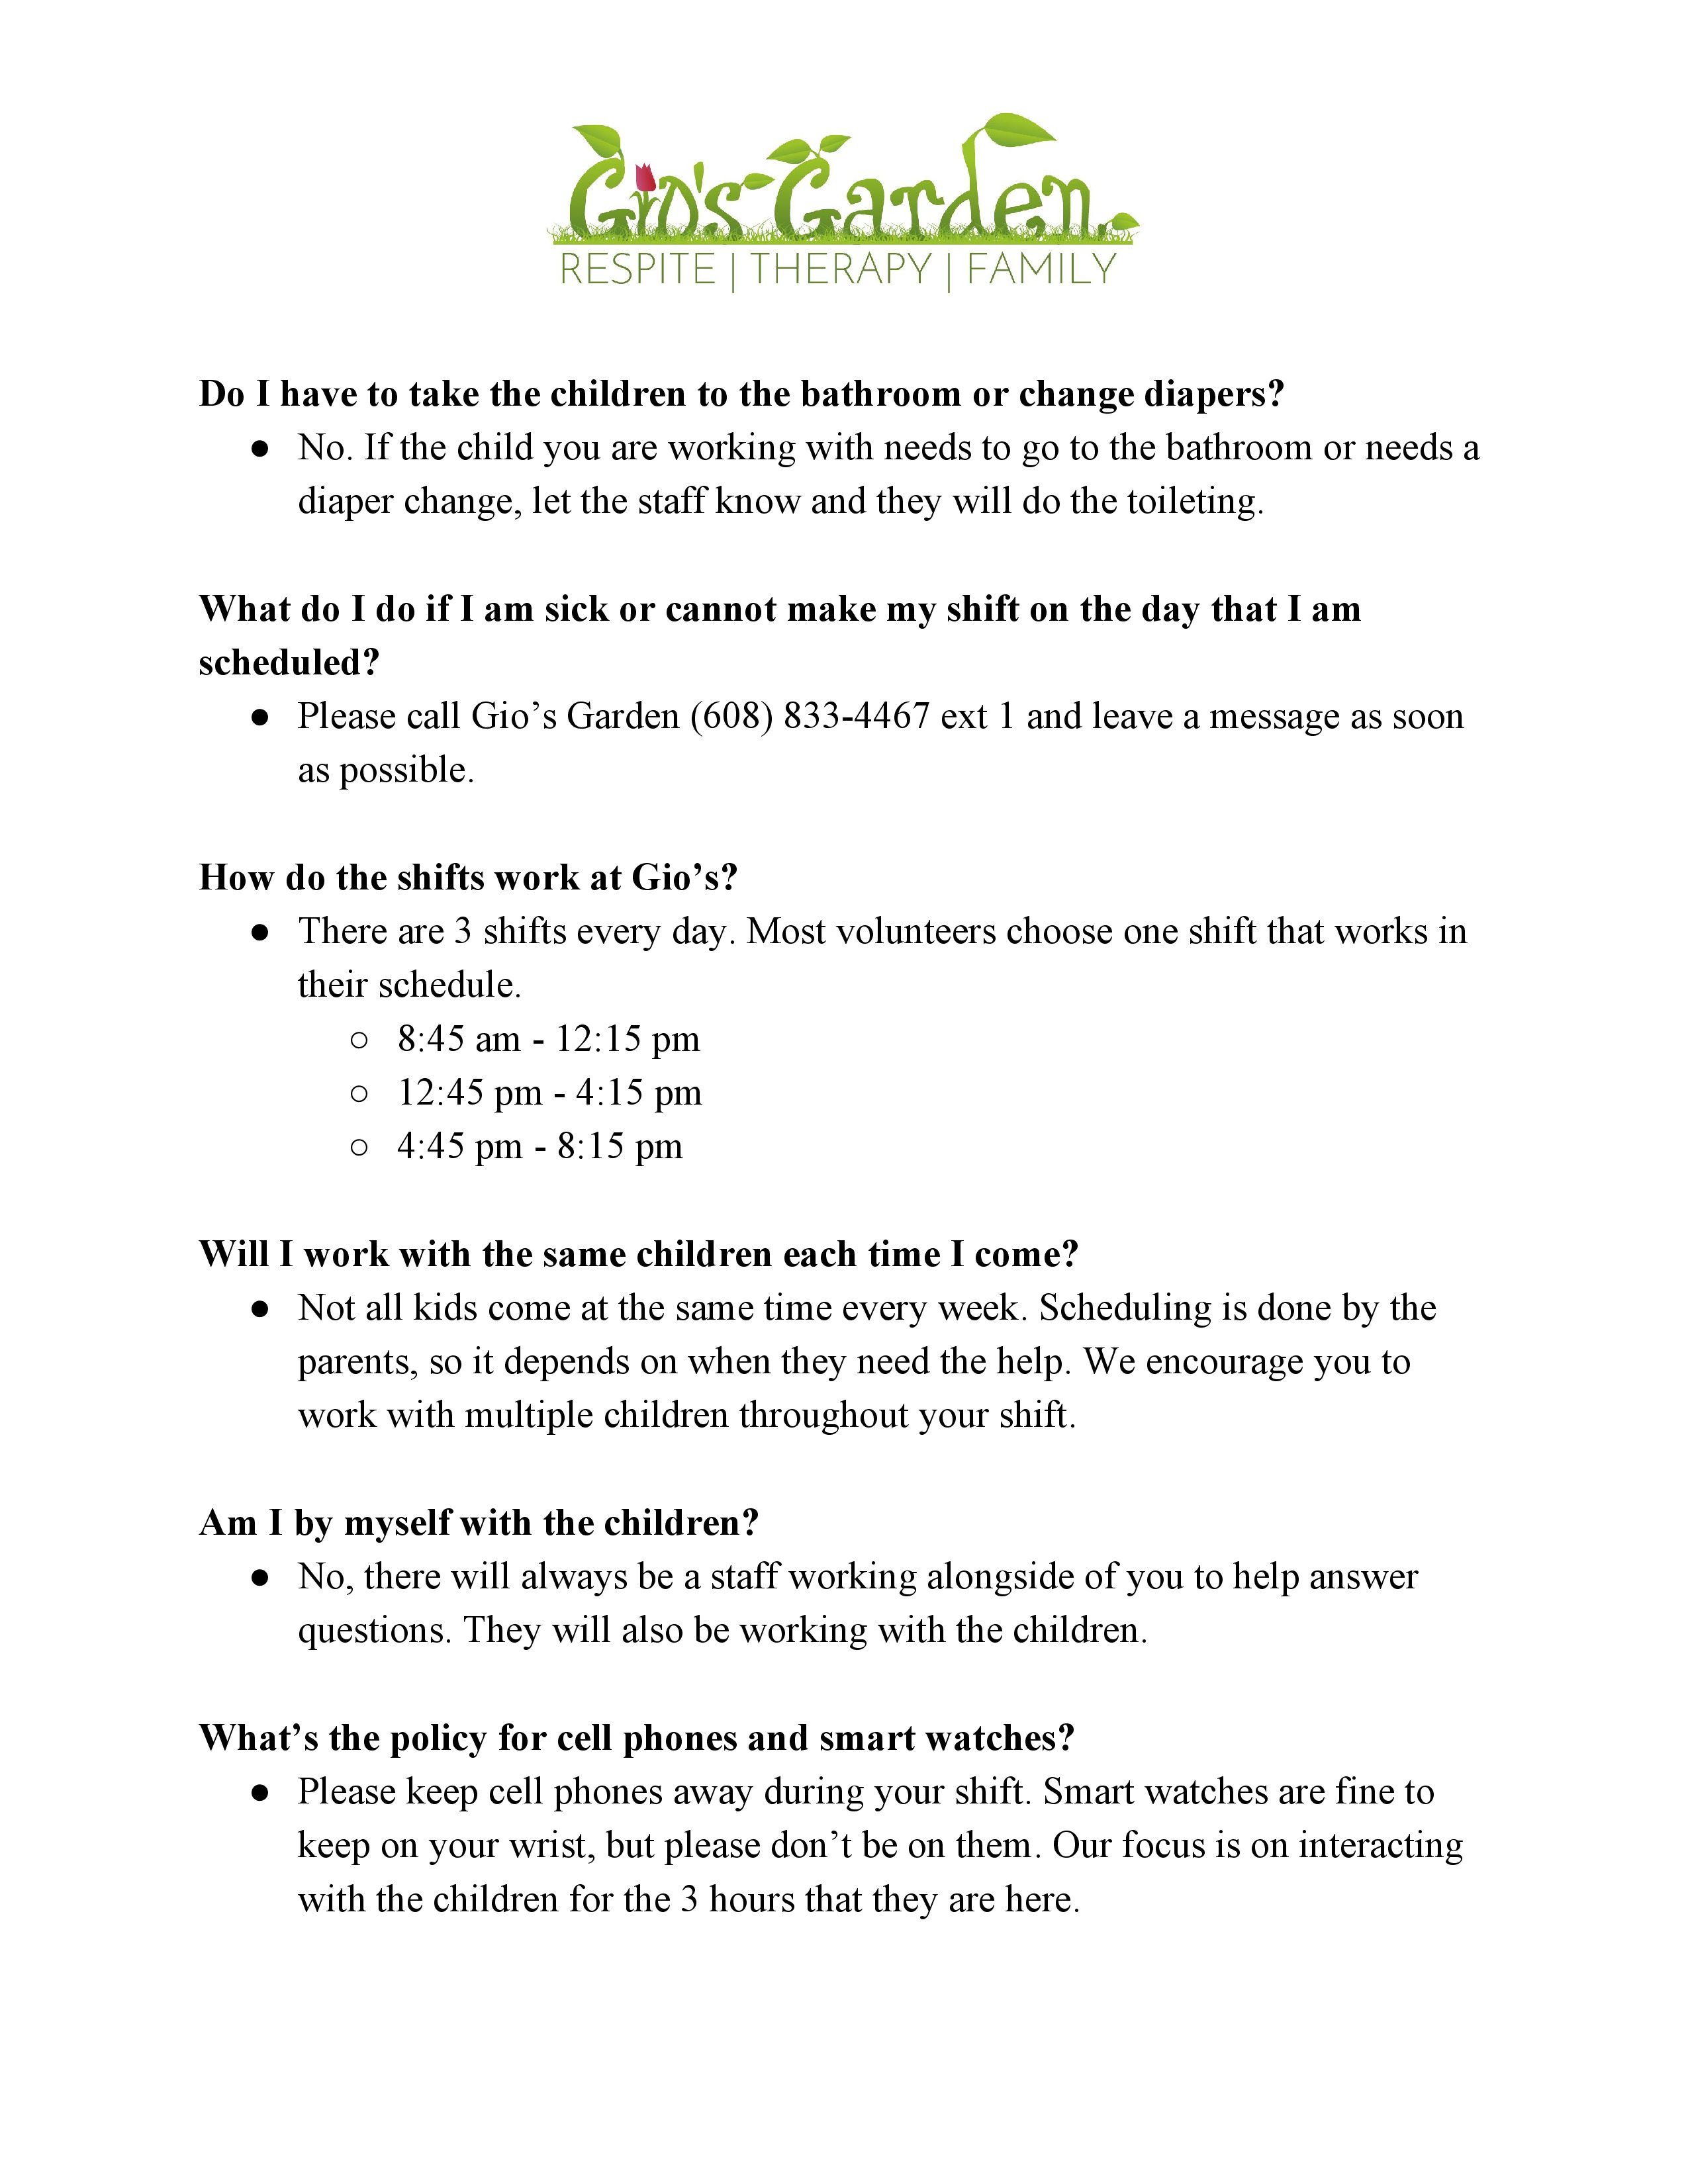 FAQS for Volunteers_Interns-page-1